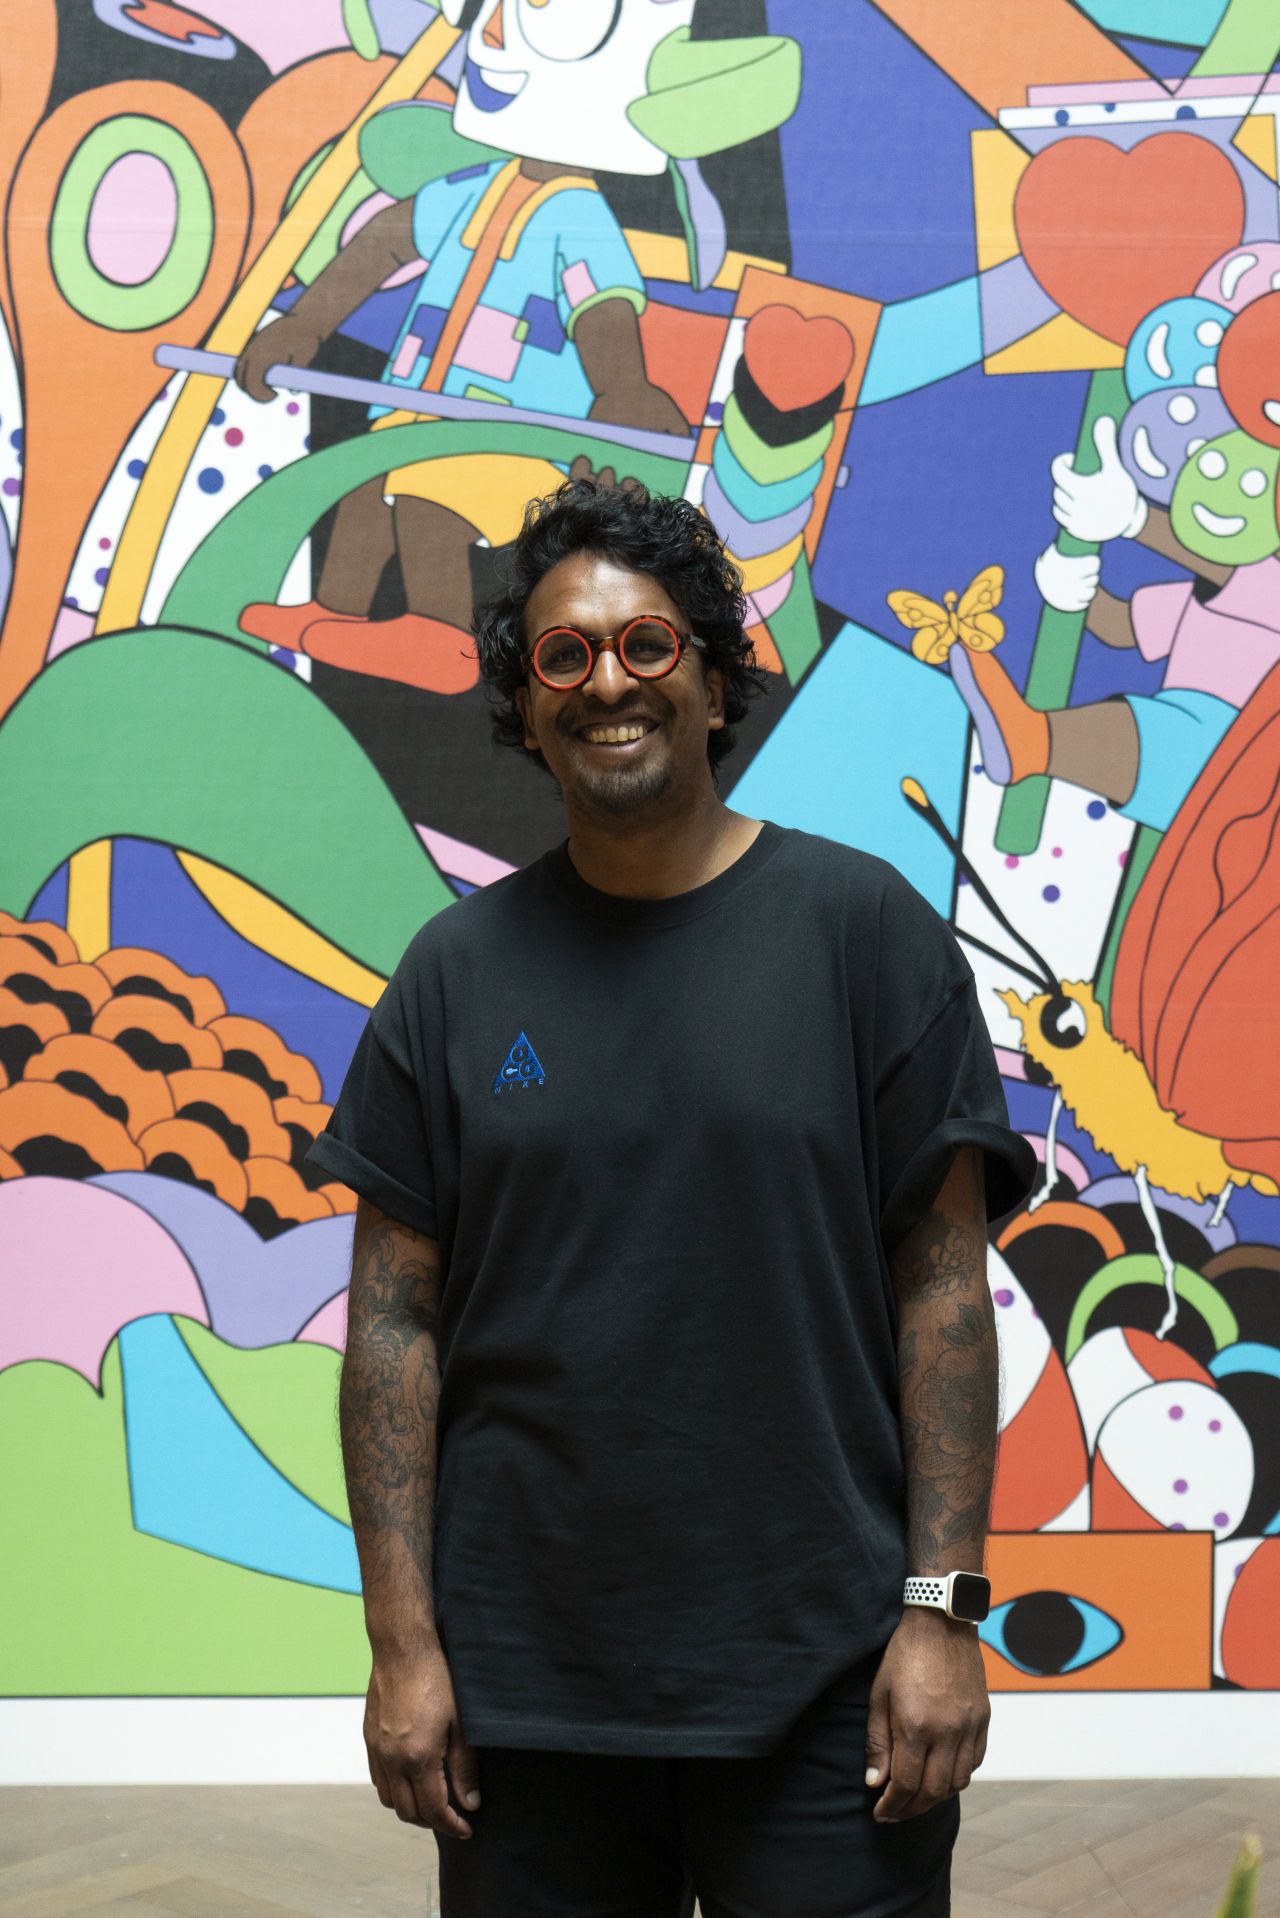 Murugiah's psychedelic mural celebrates inclusivity and creativity at ...